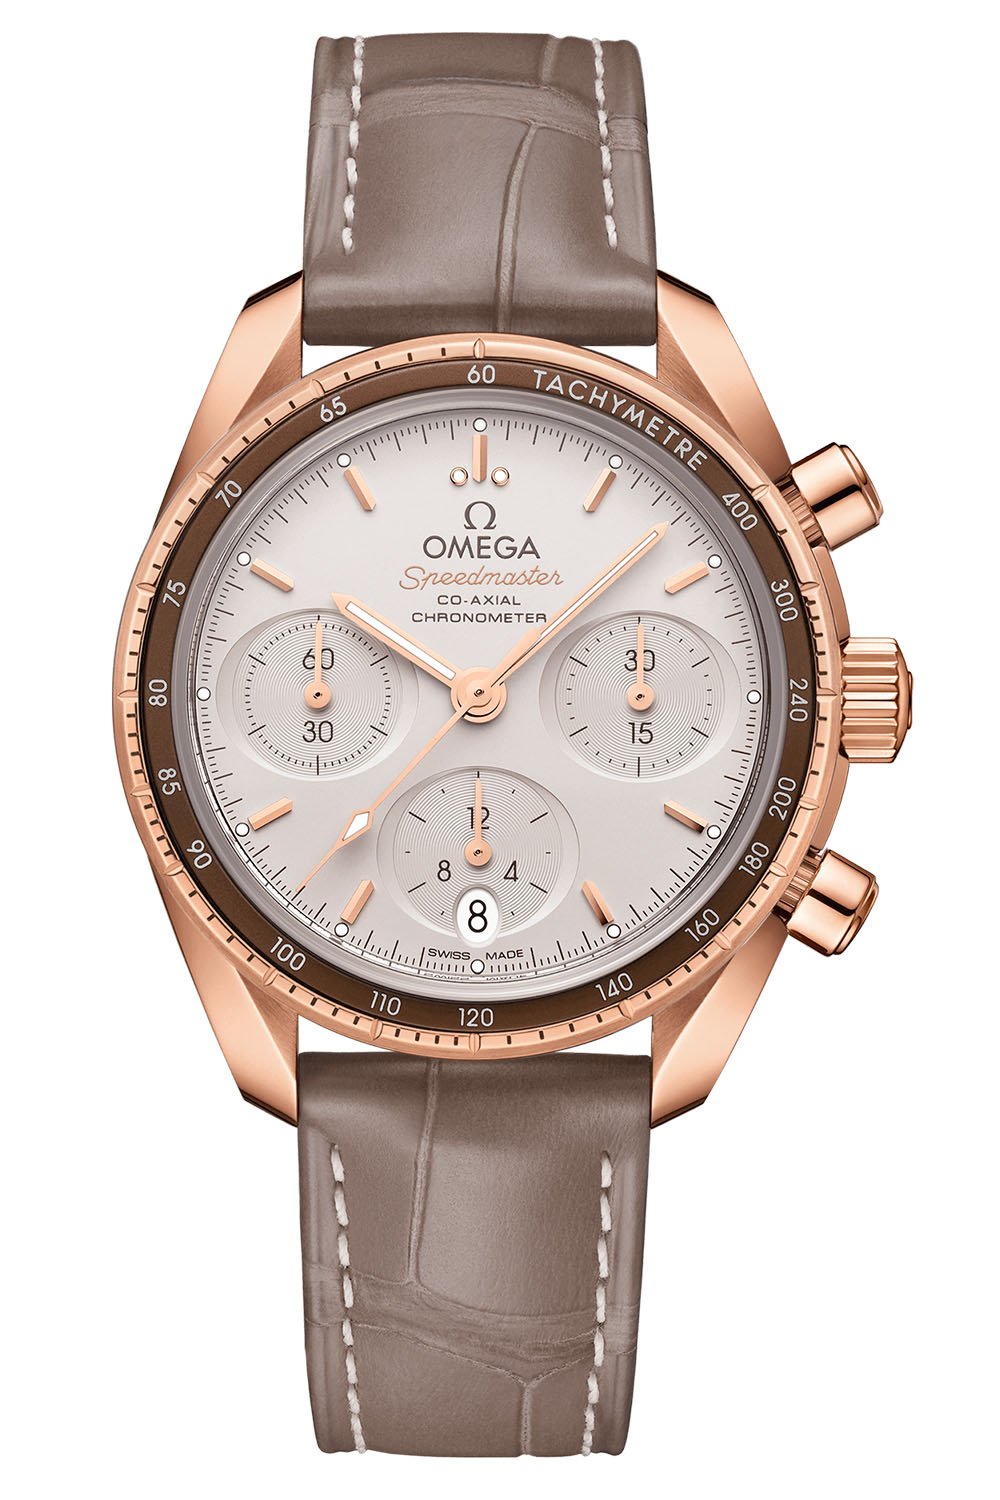 Omega Speedmaster 38mm Co-Axial Chronograph Full Gold 2020 - 1